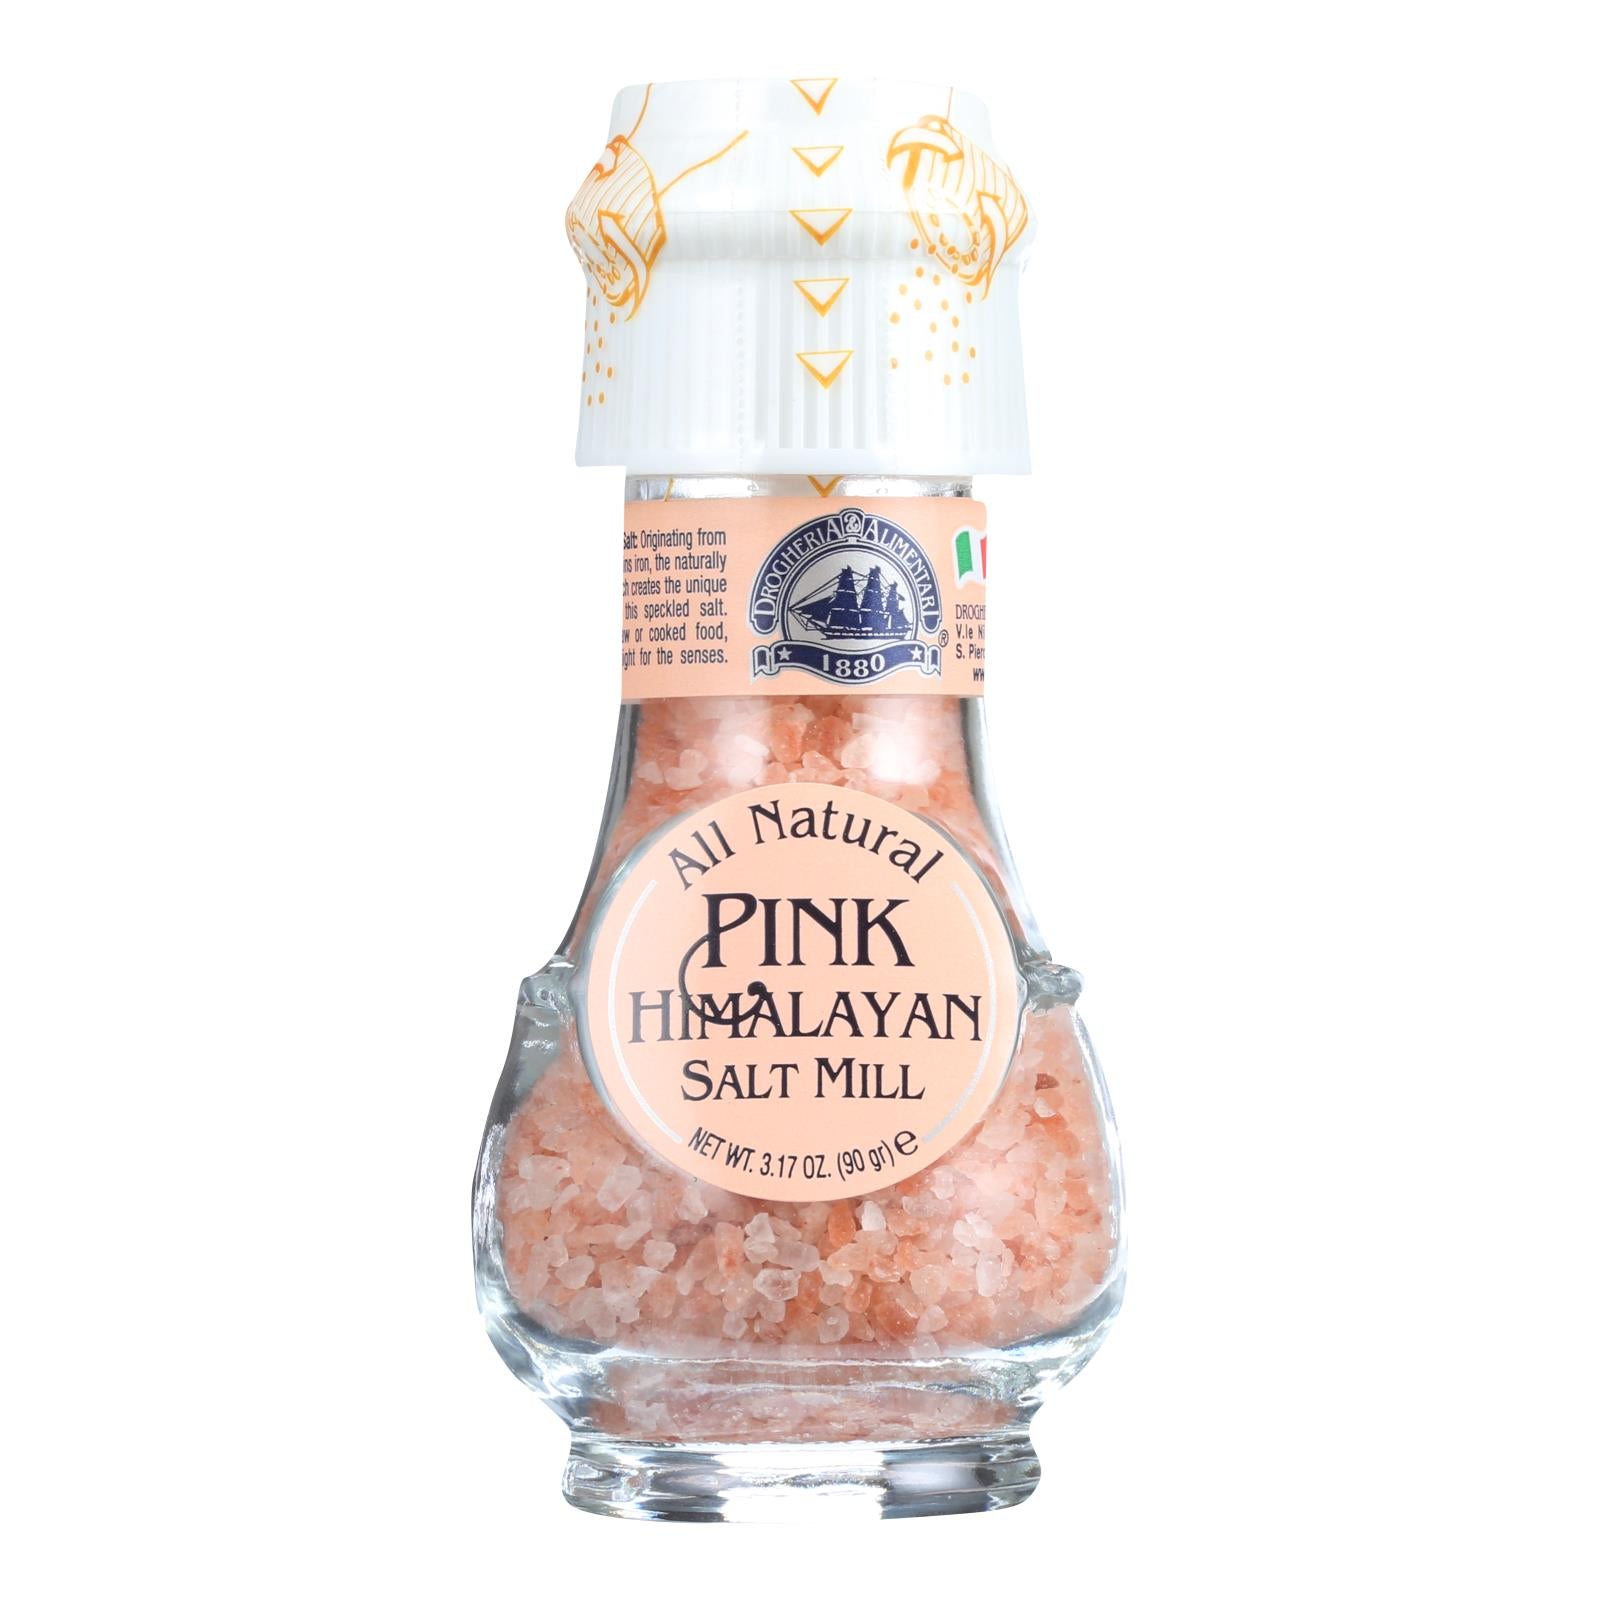 Drogheria And Alimentari Salt Mill - All Natural - Pink Himalayan - 3.17 Oz - Case Of 6 - Whole Green Foods